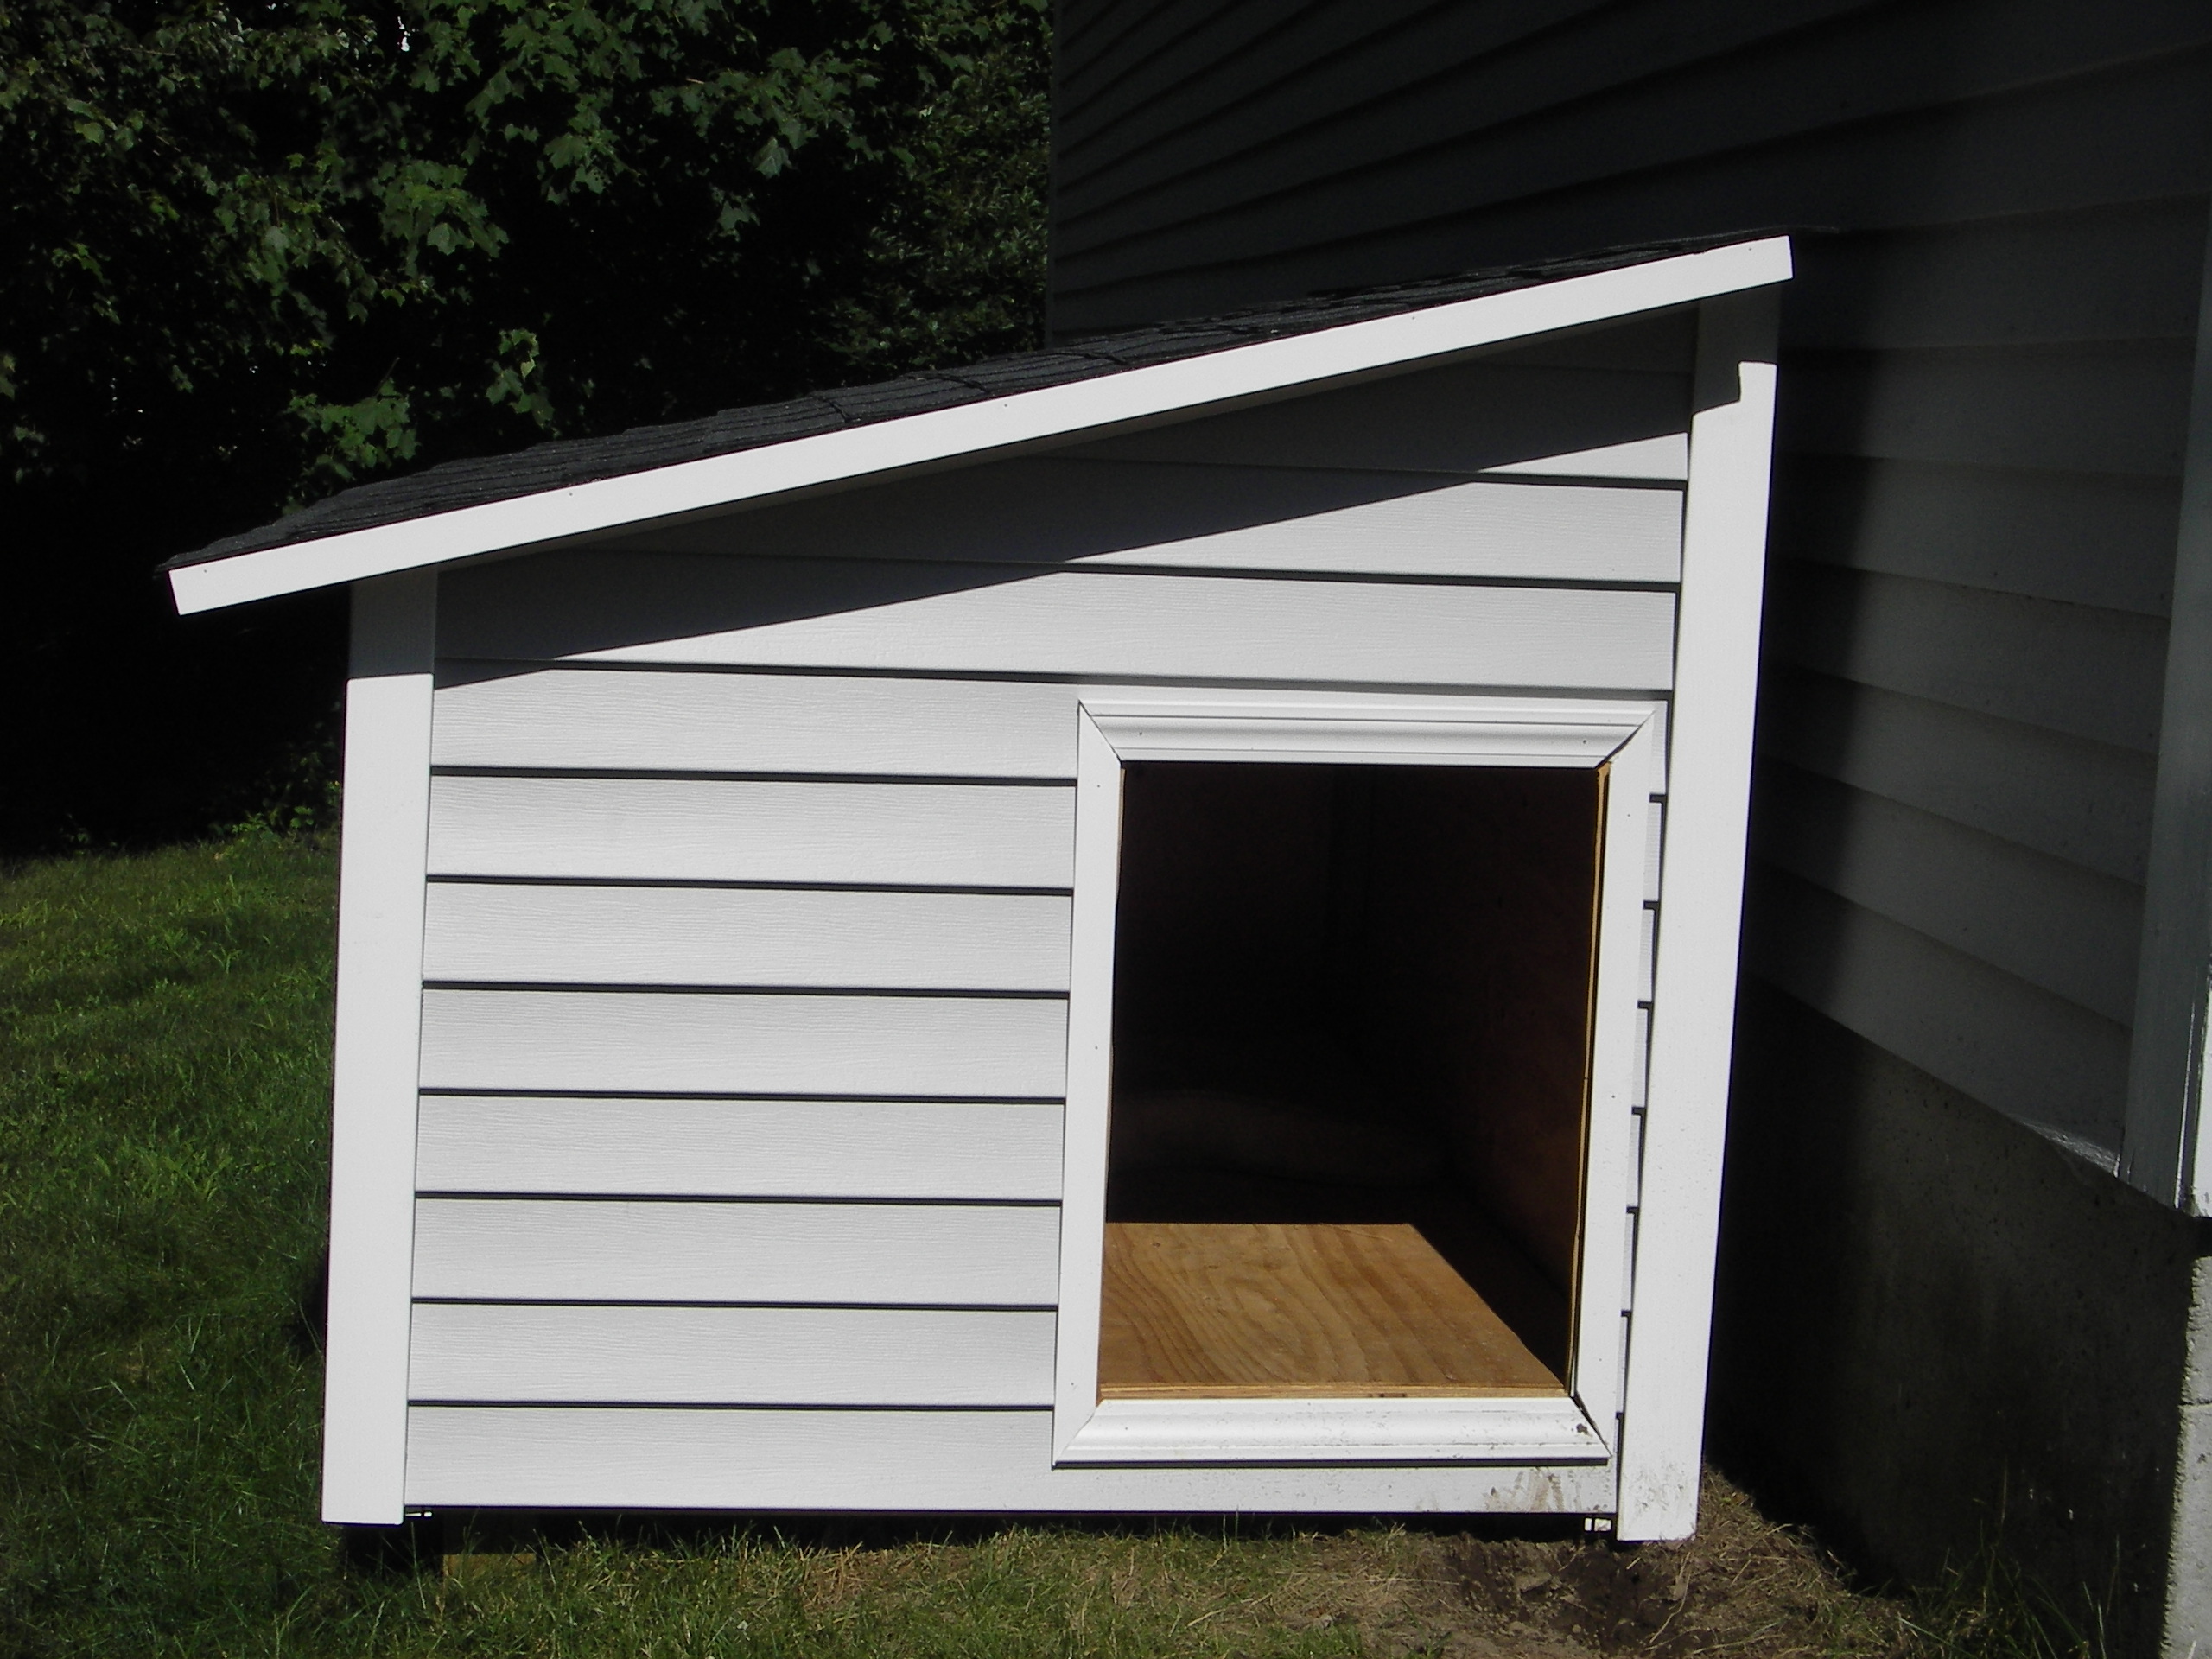 dog house for two dogs